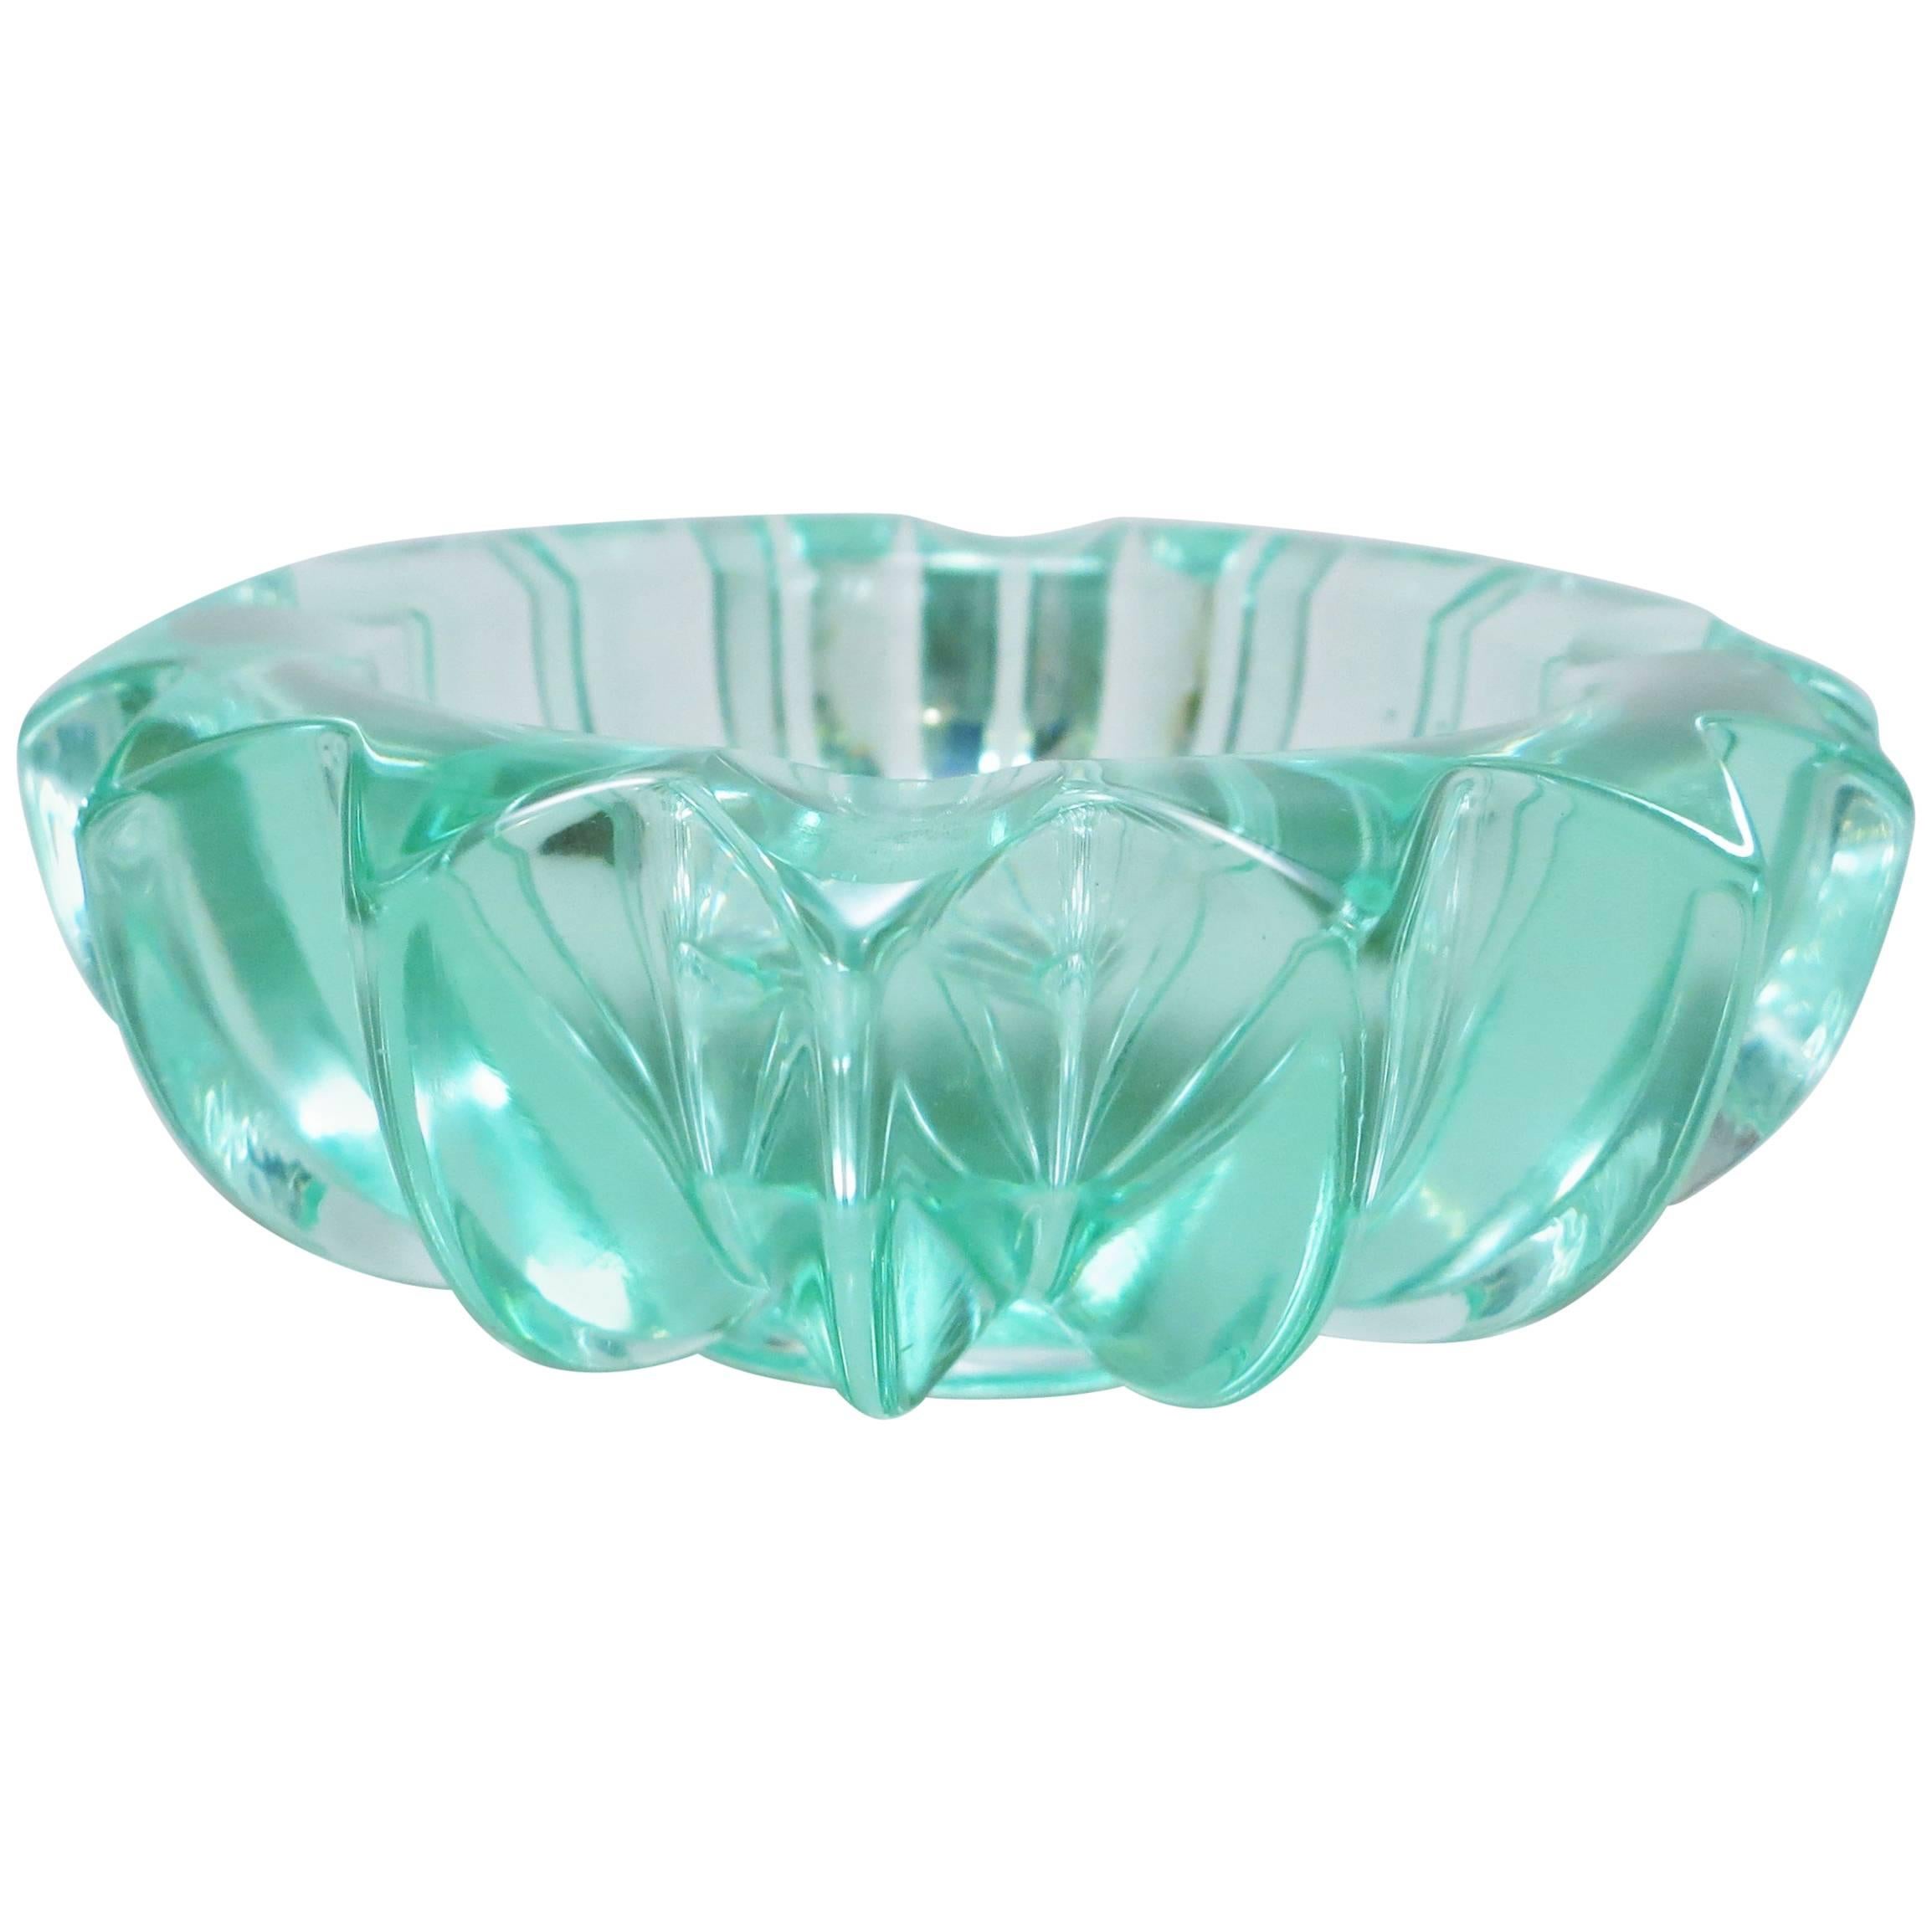 Art Deco Ashtray in Green Glass by Pierre D'Avesn